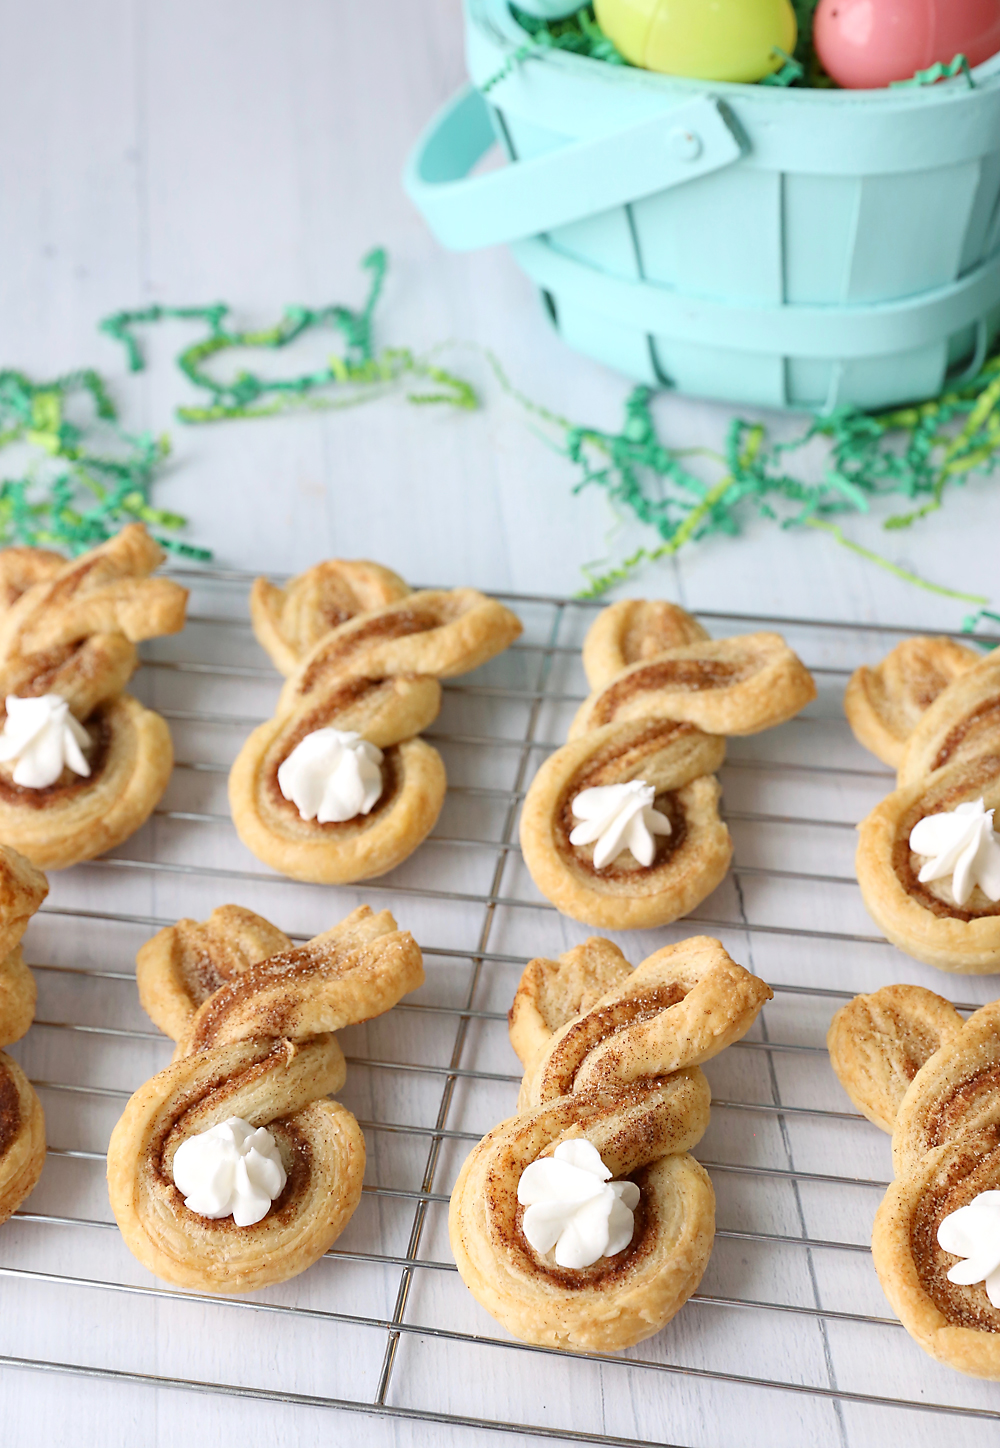 Cinnamon sugar bunny treats made from twisted strips of puff pastry with dots of whipped cream for tails